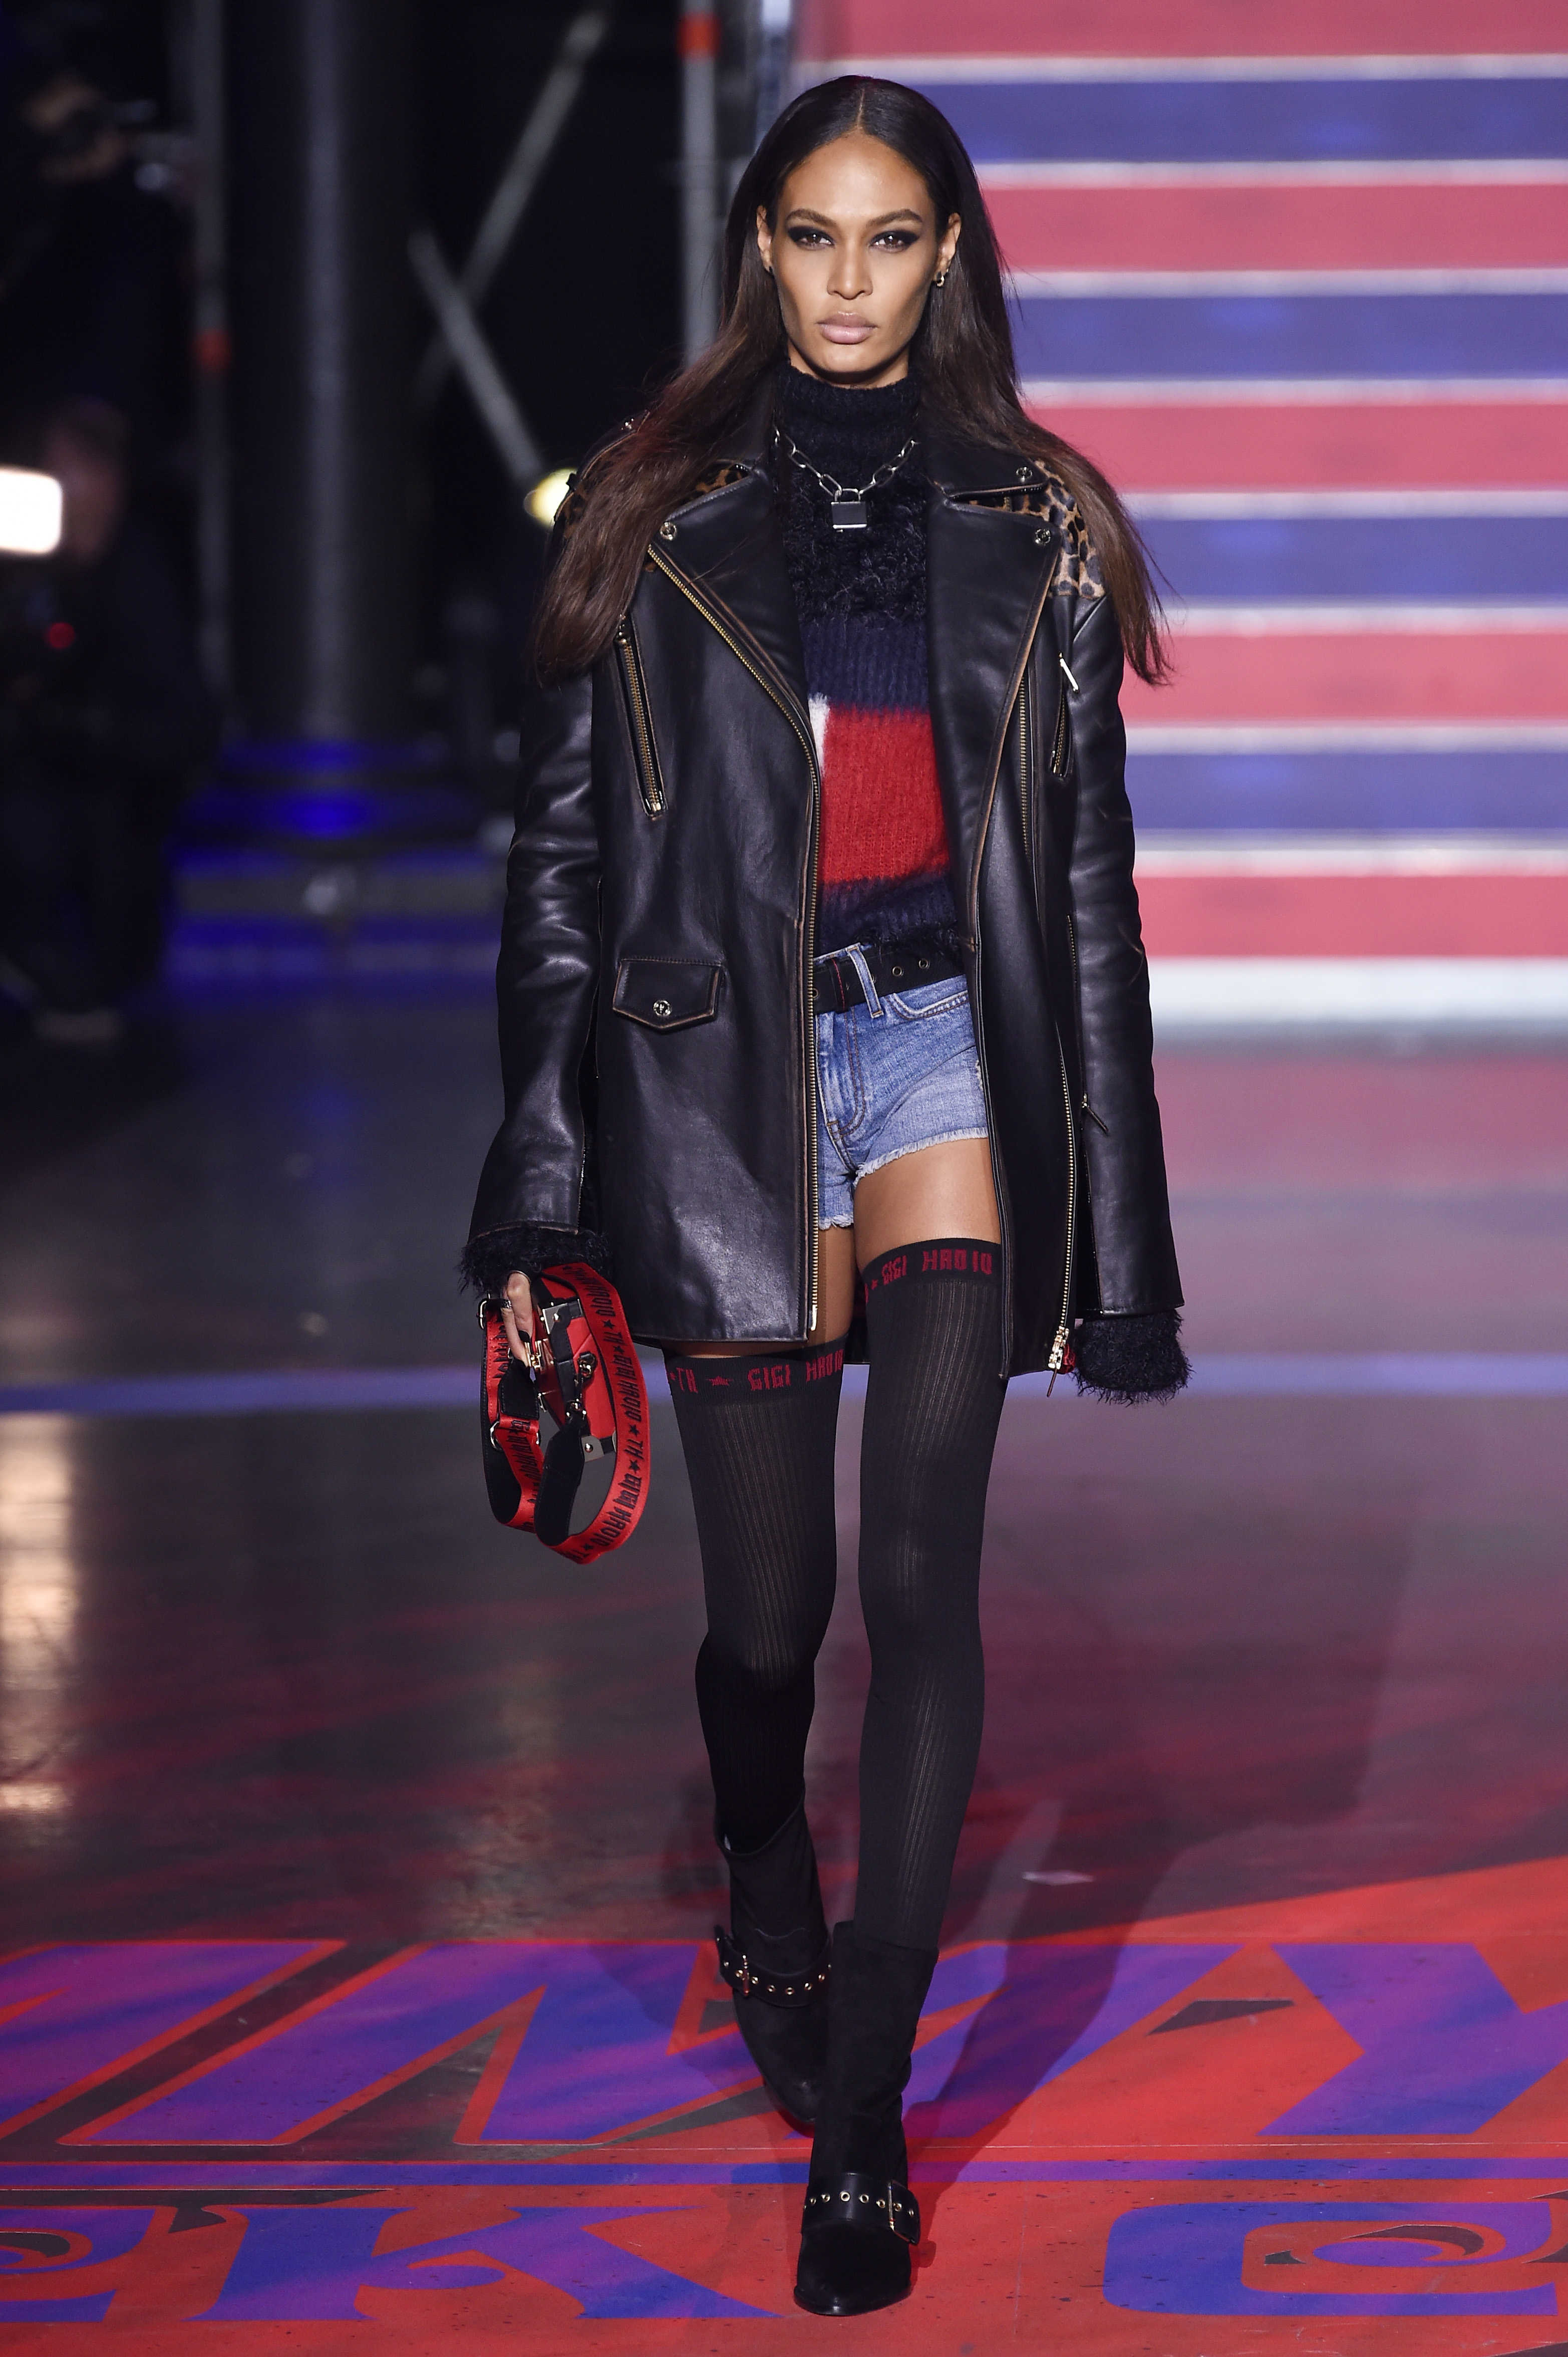 Joan Smalls attends the Tommy Hilfiger show